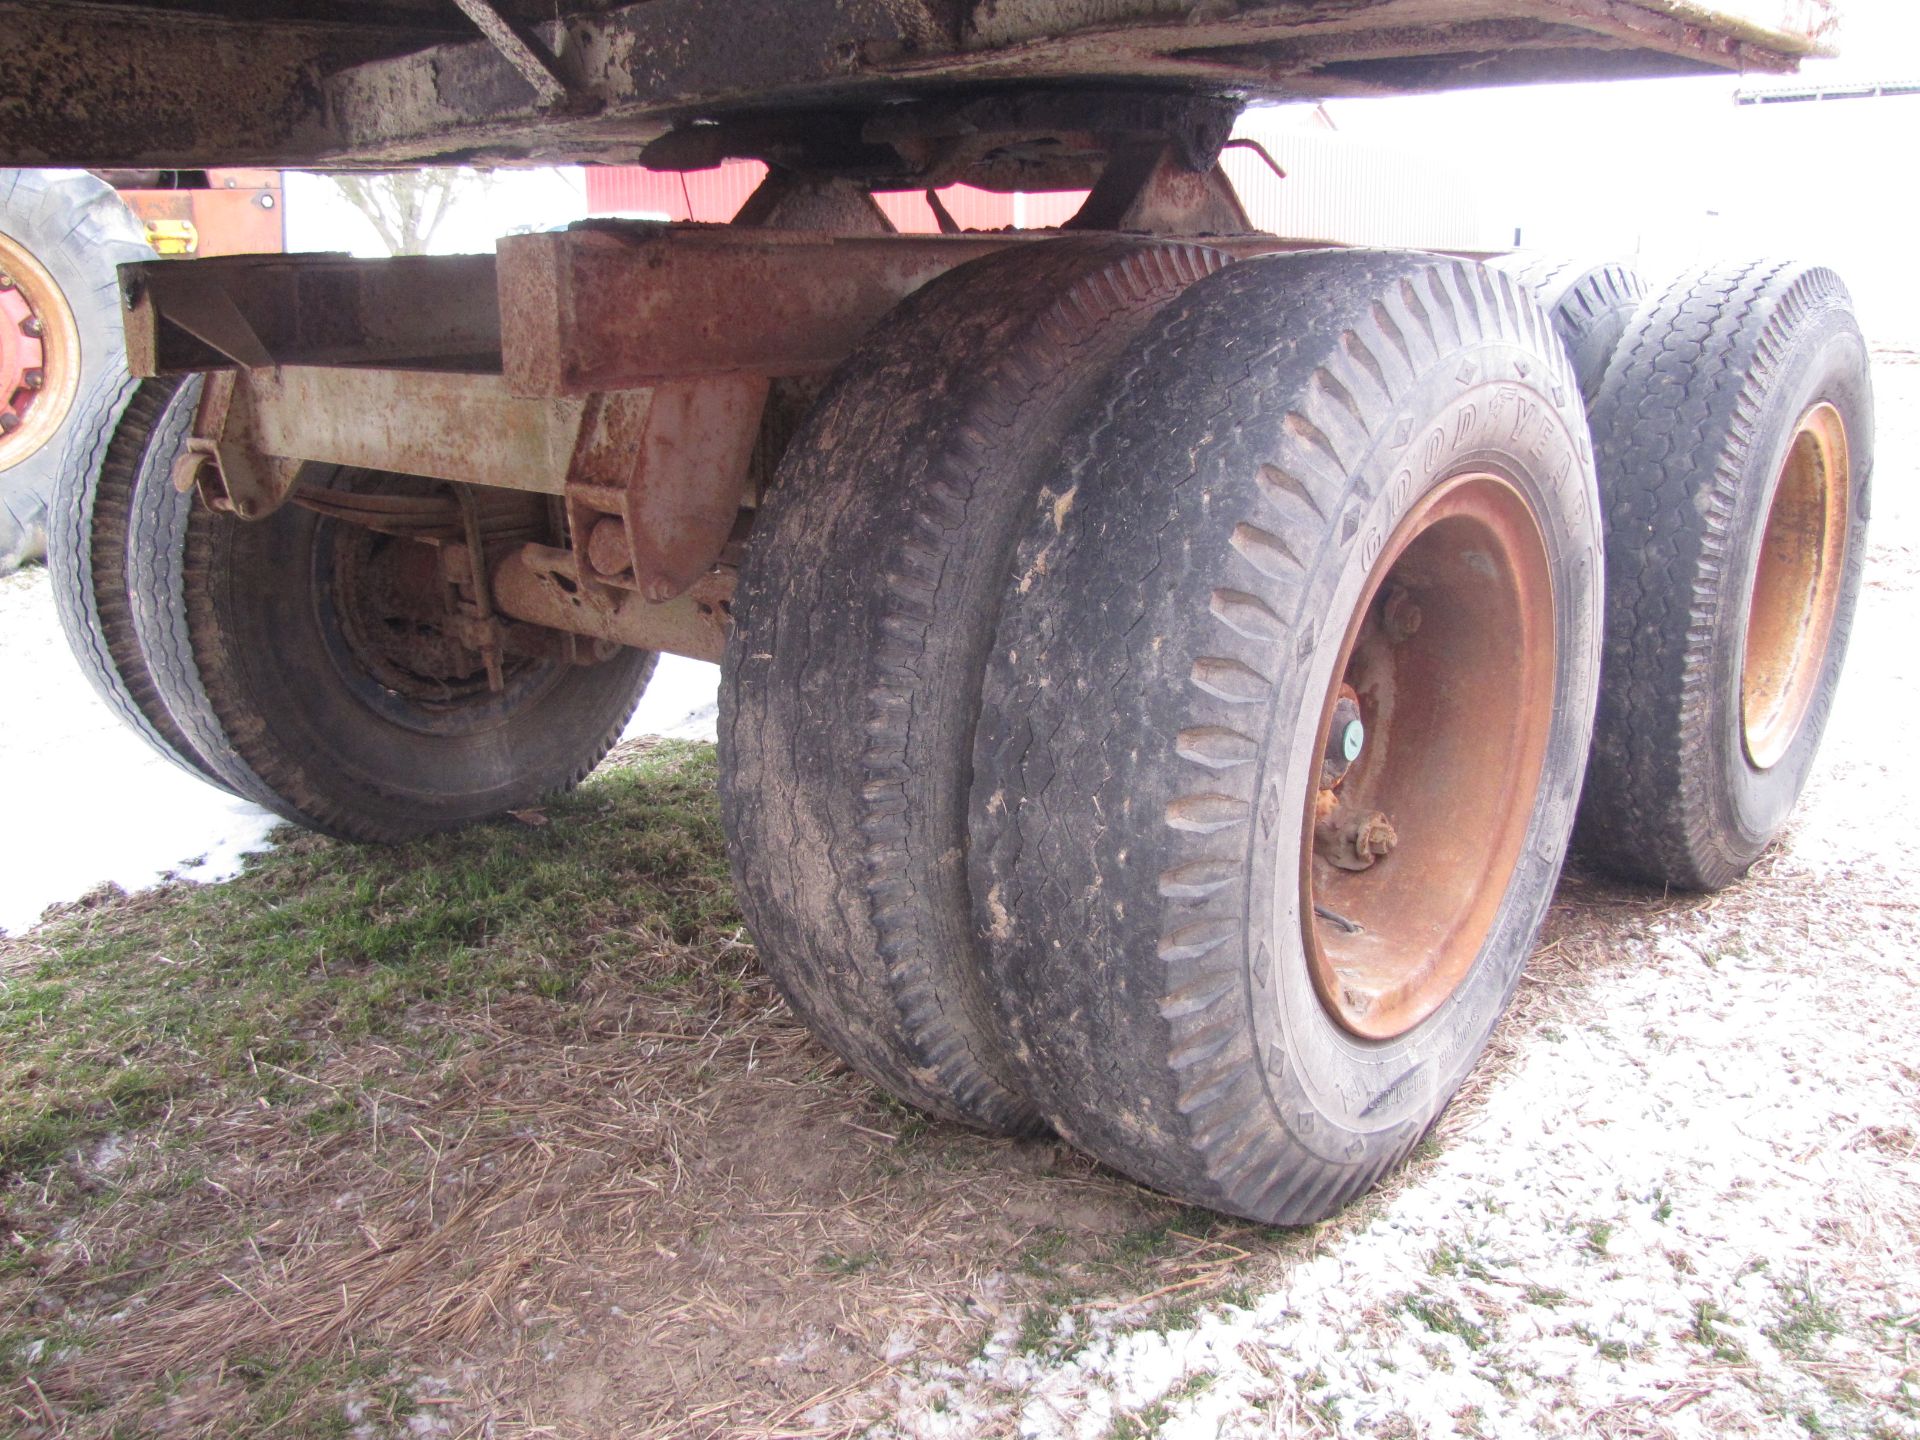 Tandem axle, pull type fifth wheel dolley - Image 9 of 13